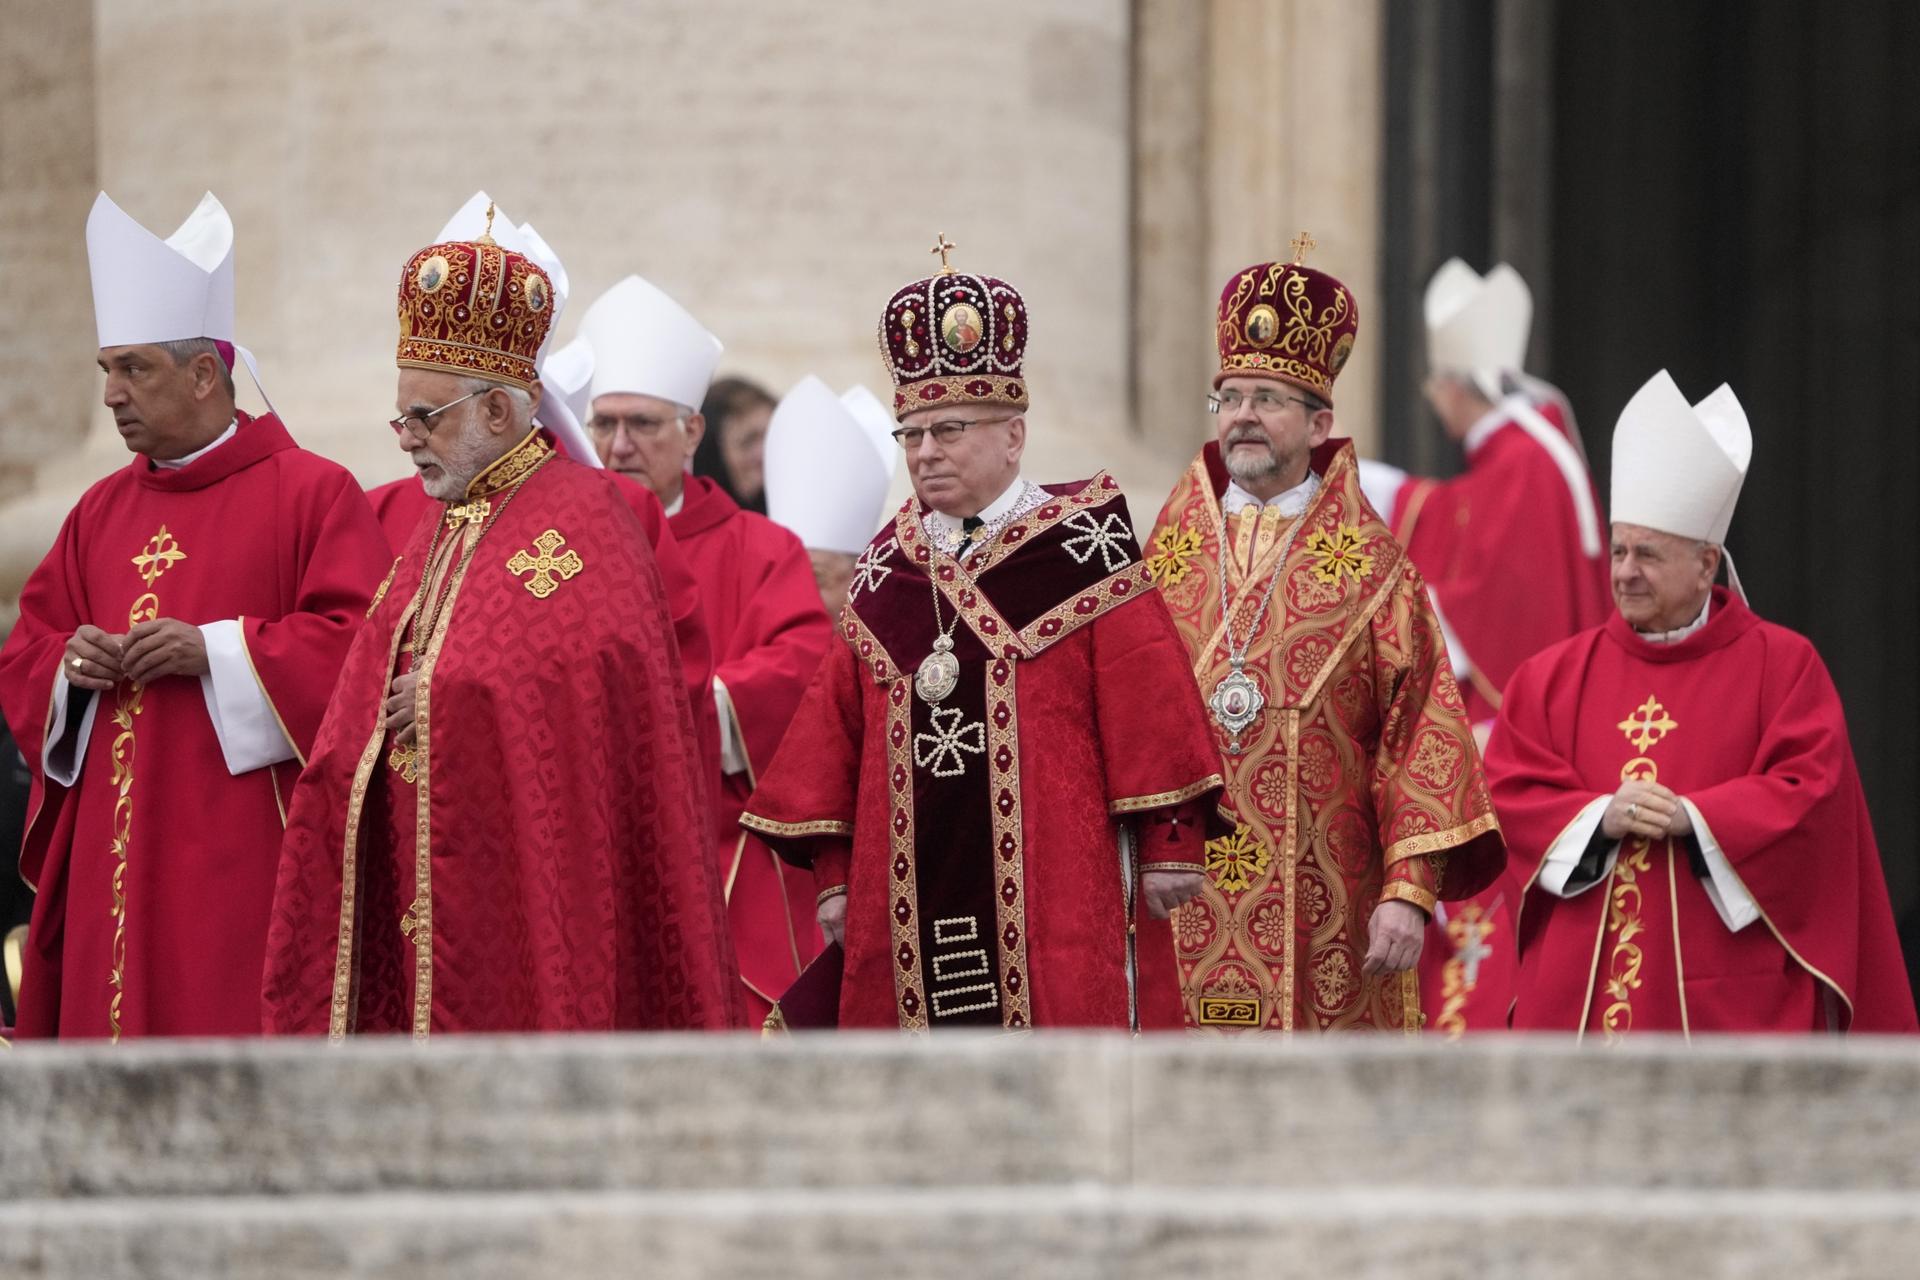 Cardinals arrive in procession ahead of the funeral mass for late Pope Emeritus Benedict XVI in St. Peter's Square at the Vatican, Jan. 5, 2023.